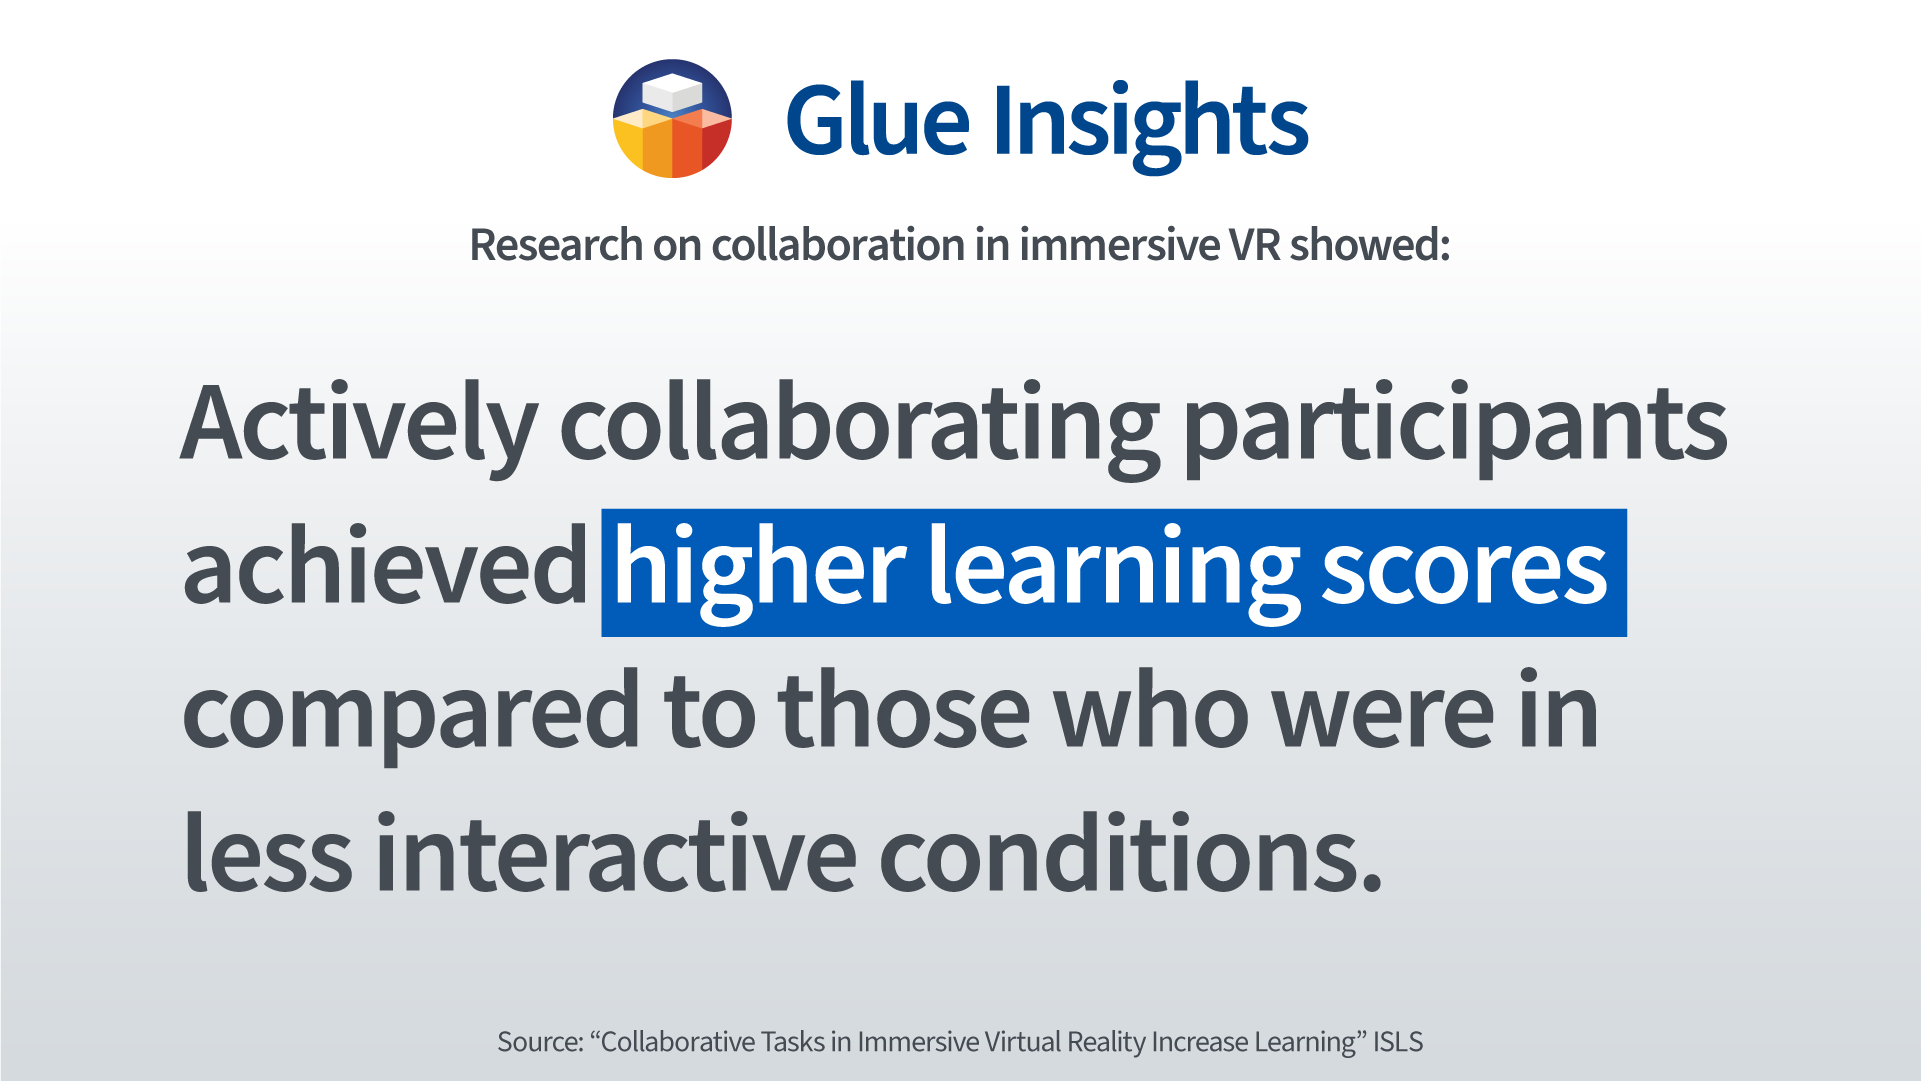 vr collaboration increases learning outcomes